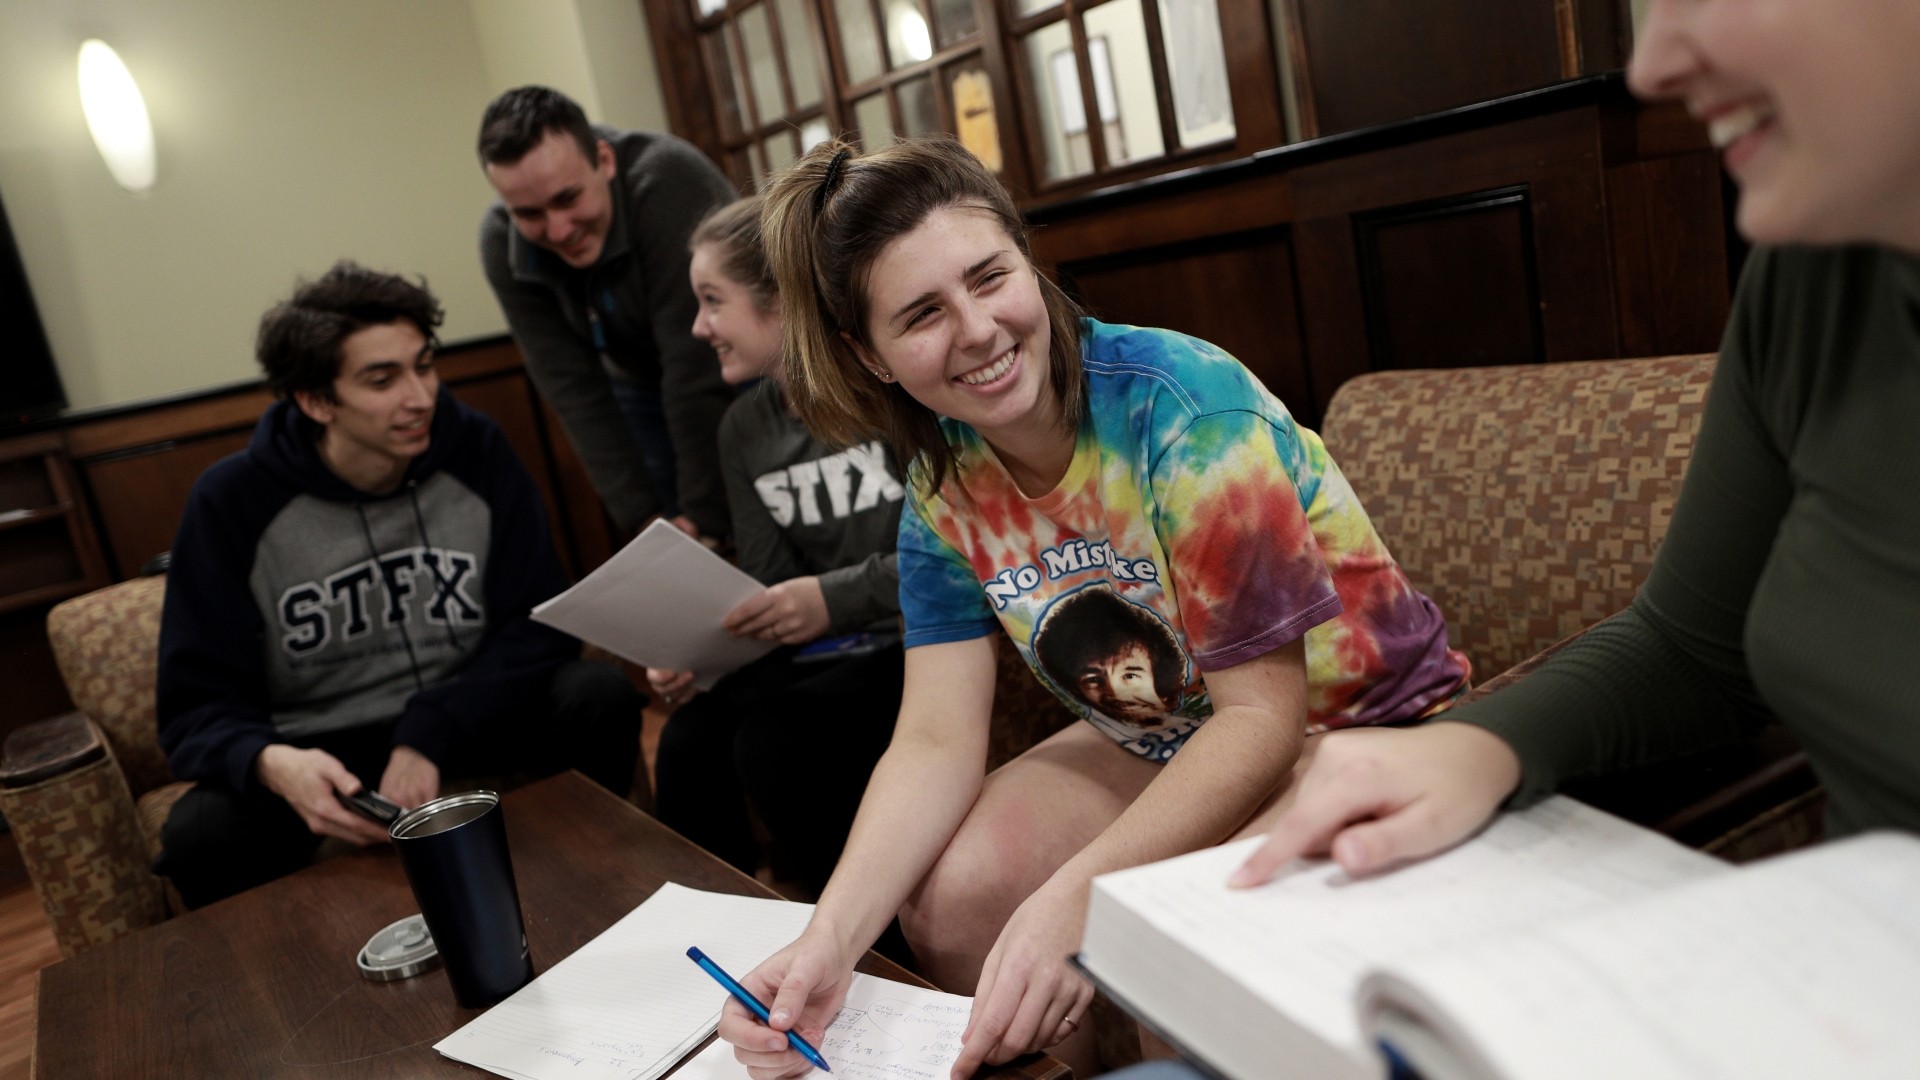 Students studying in the Bishops Hall lounge area. They are sitting on couches, using a table in the center for their notes.